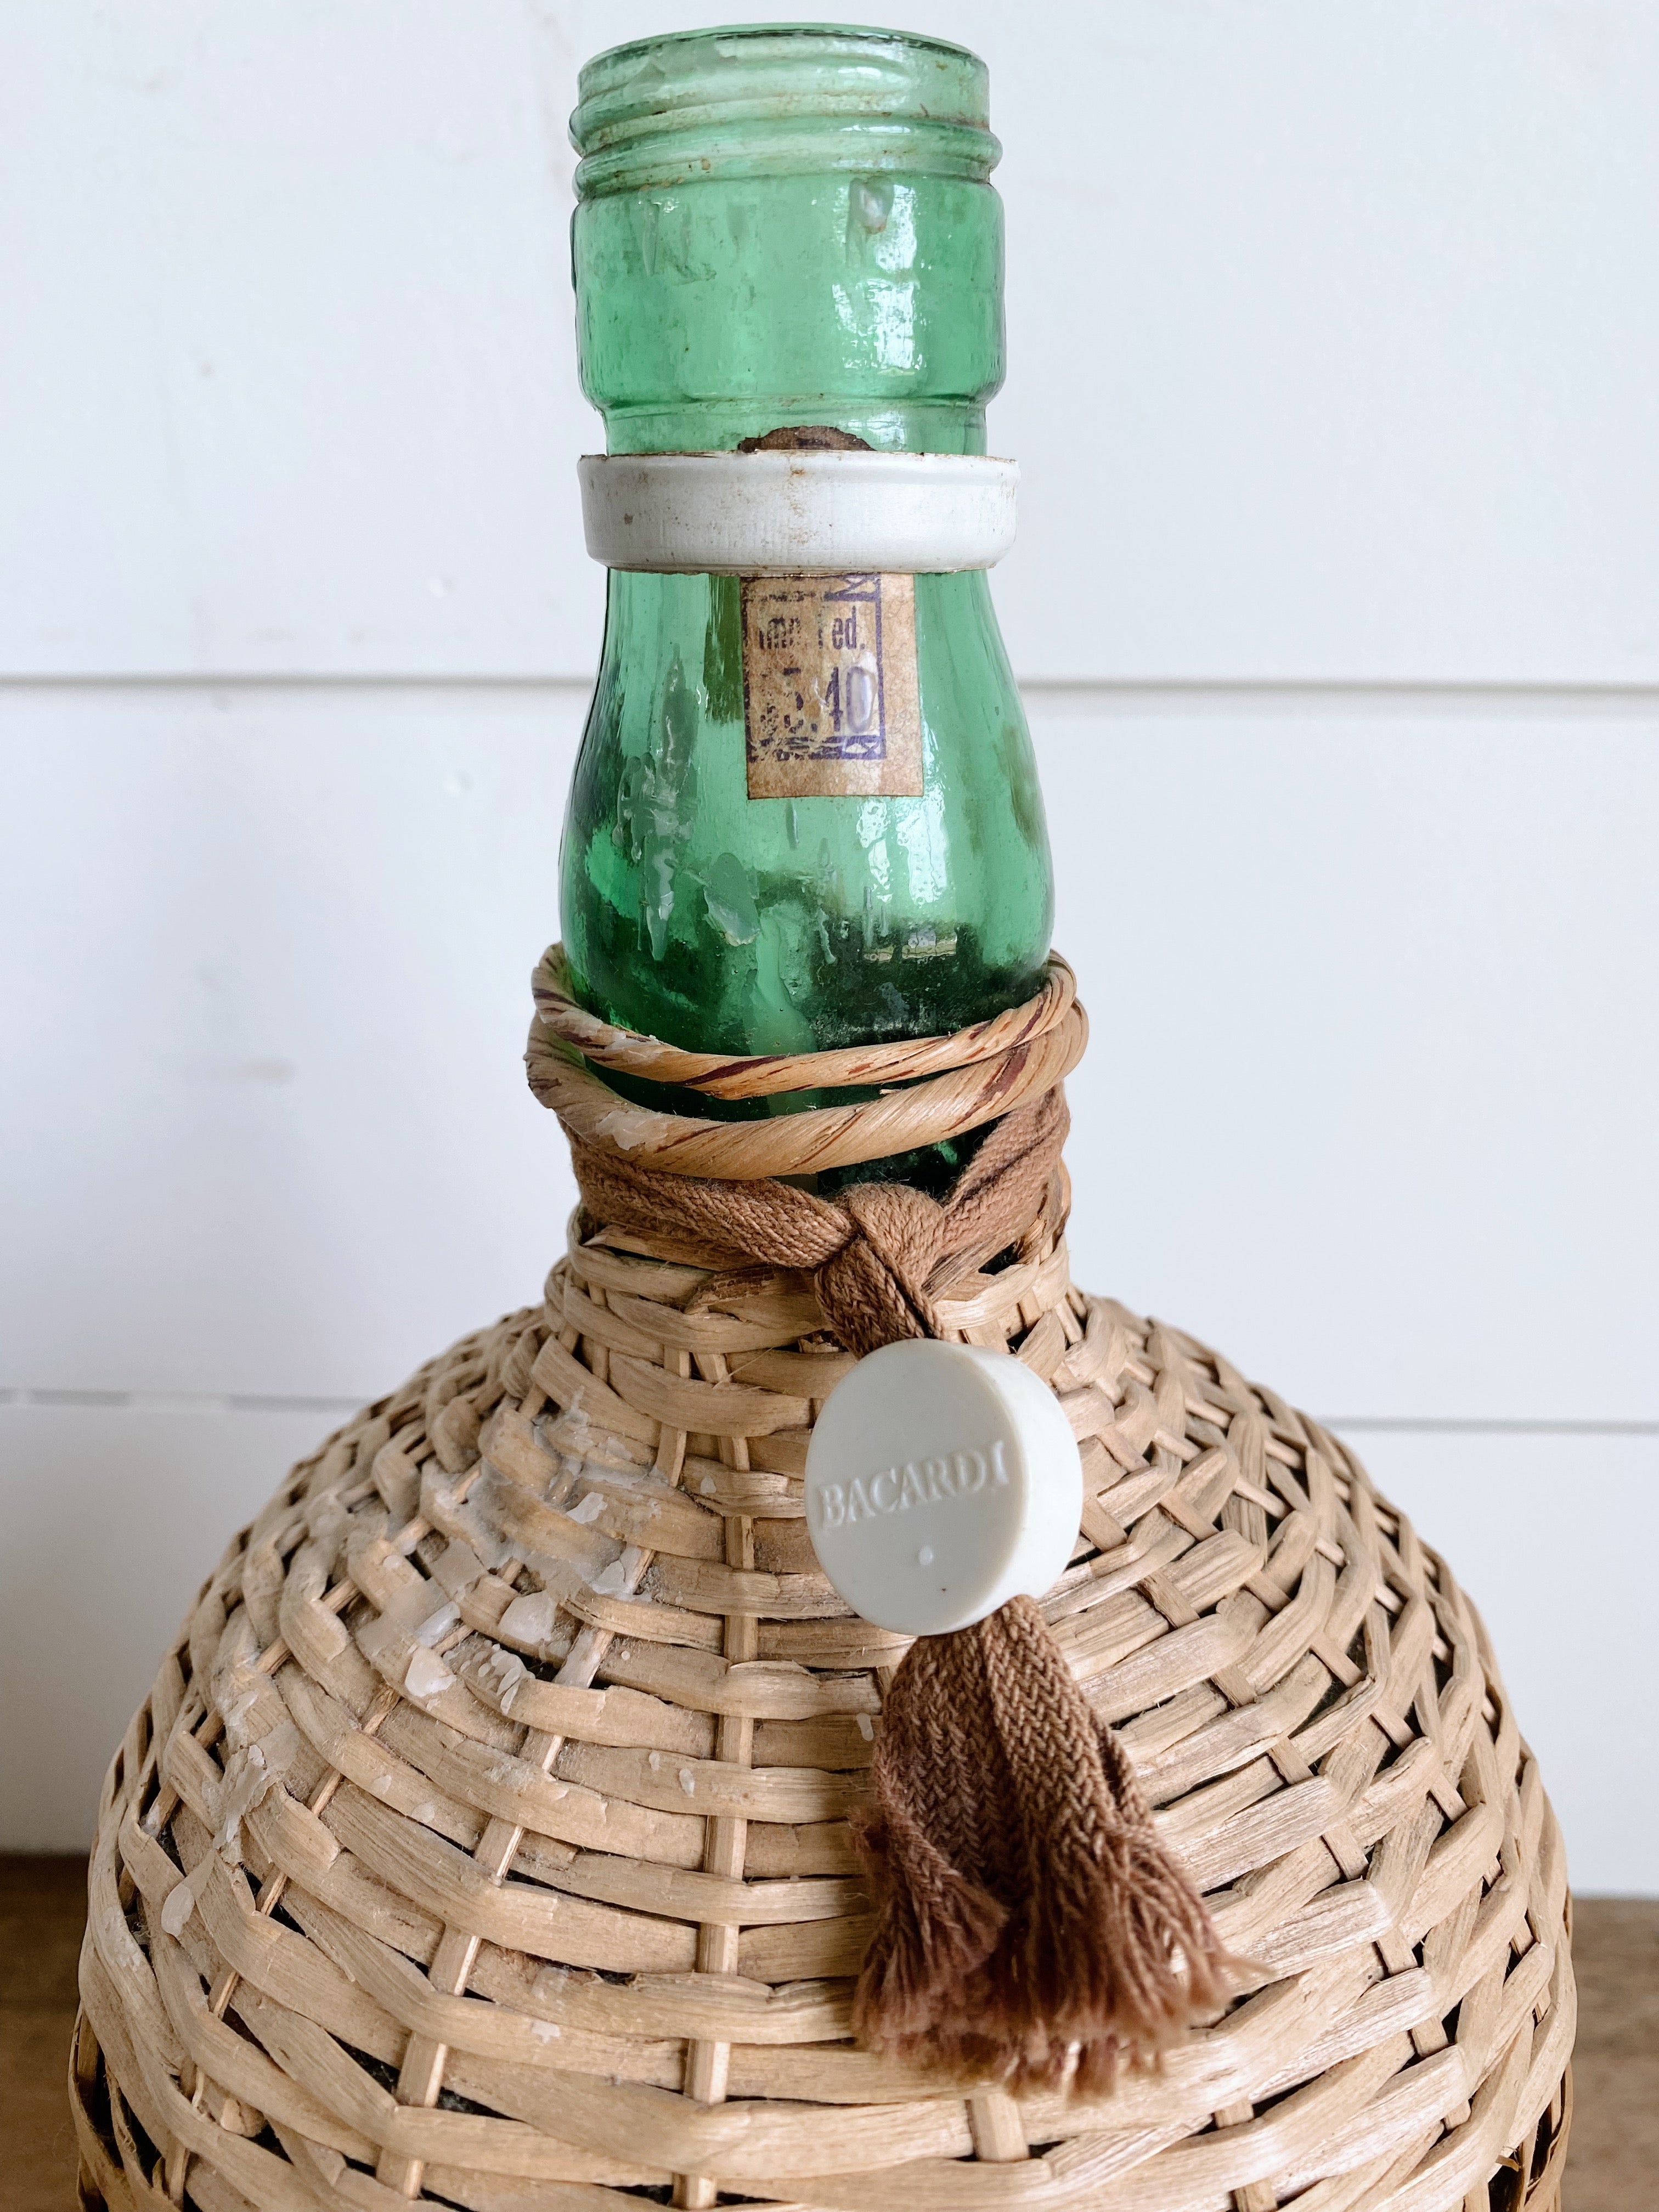 Large Demijohn with Pretty Green Glass Bottle